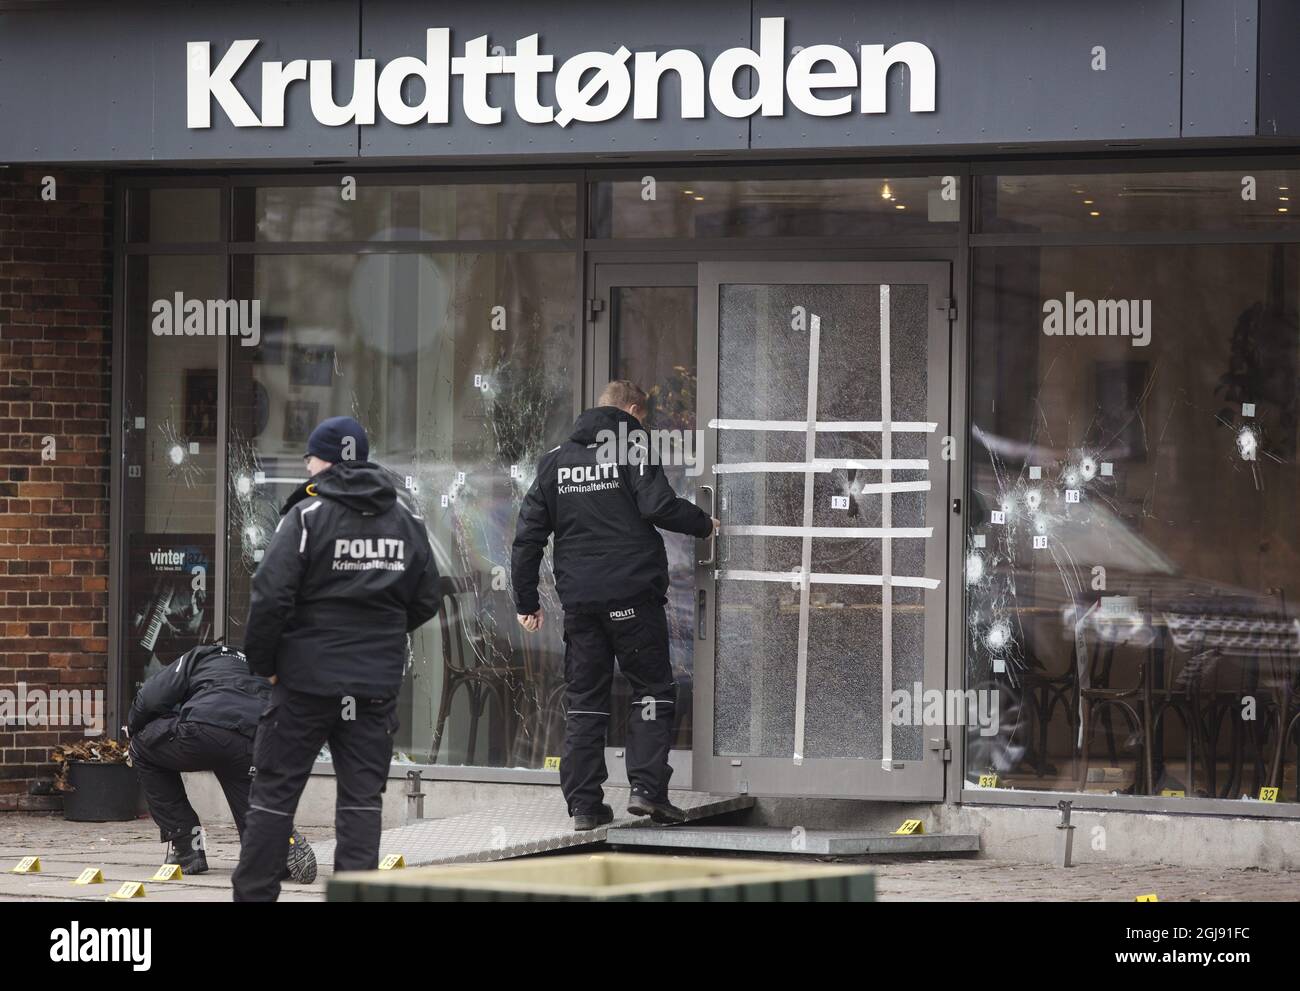 COPENHAGEN 2015-02-15 Police investigators work outside the entrance filled with bullet holes at the KrudttÃ¸nden culture club in Copenhagen, Denmark, February 15, 2015. The Danish police shot and killed a suspected terrorist early Sunday morning. The man killed is suspected of the attacks against the main synagogue and a debate on Islam and free speech with Swedish cartoonist Lars Vilks at the KrudttÃ¸nden culture club. Photo: Ola Torkelsson / TT / Kod 75777 ** SWEDEN OUT **  Stock Photo